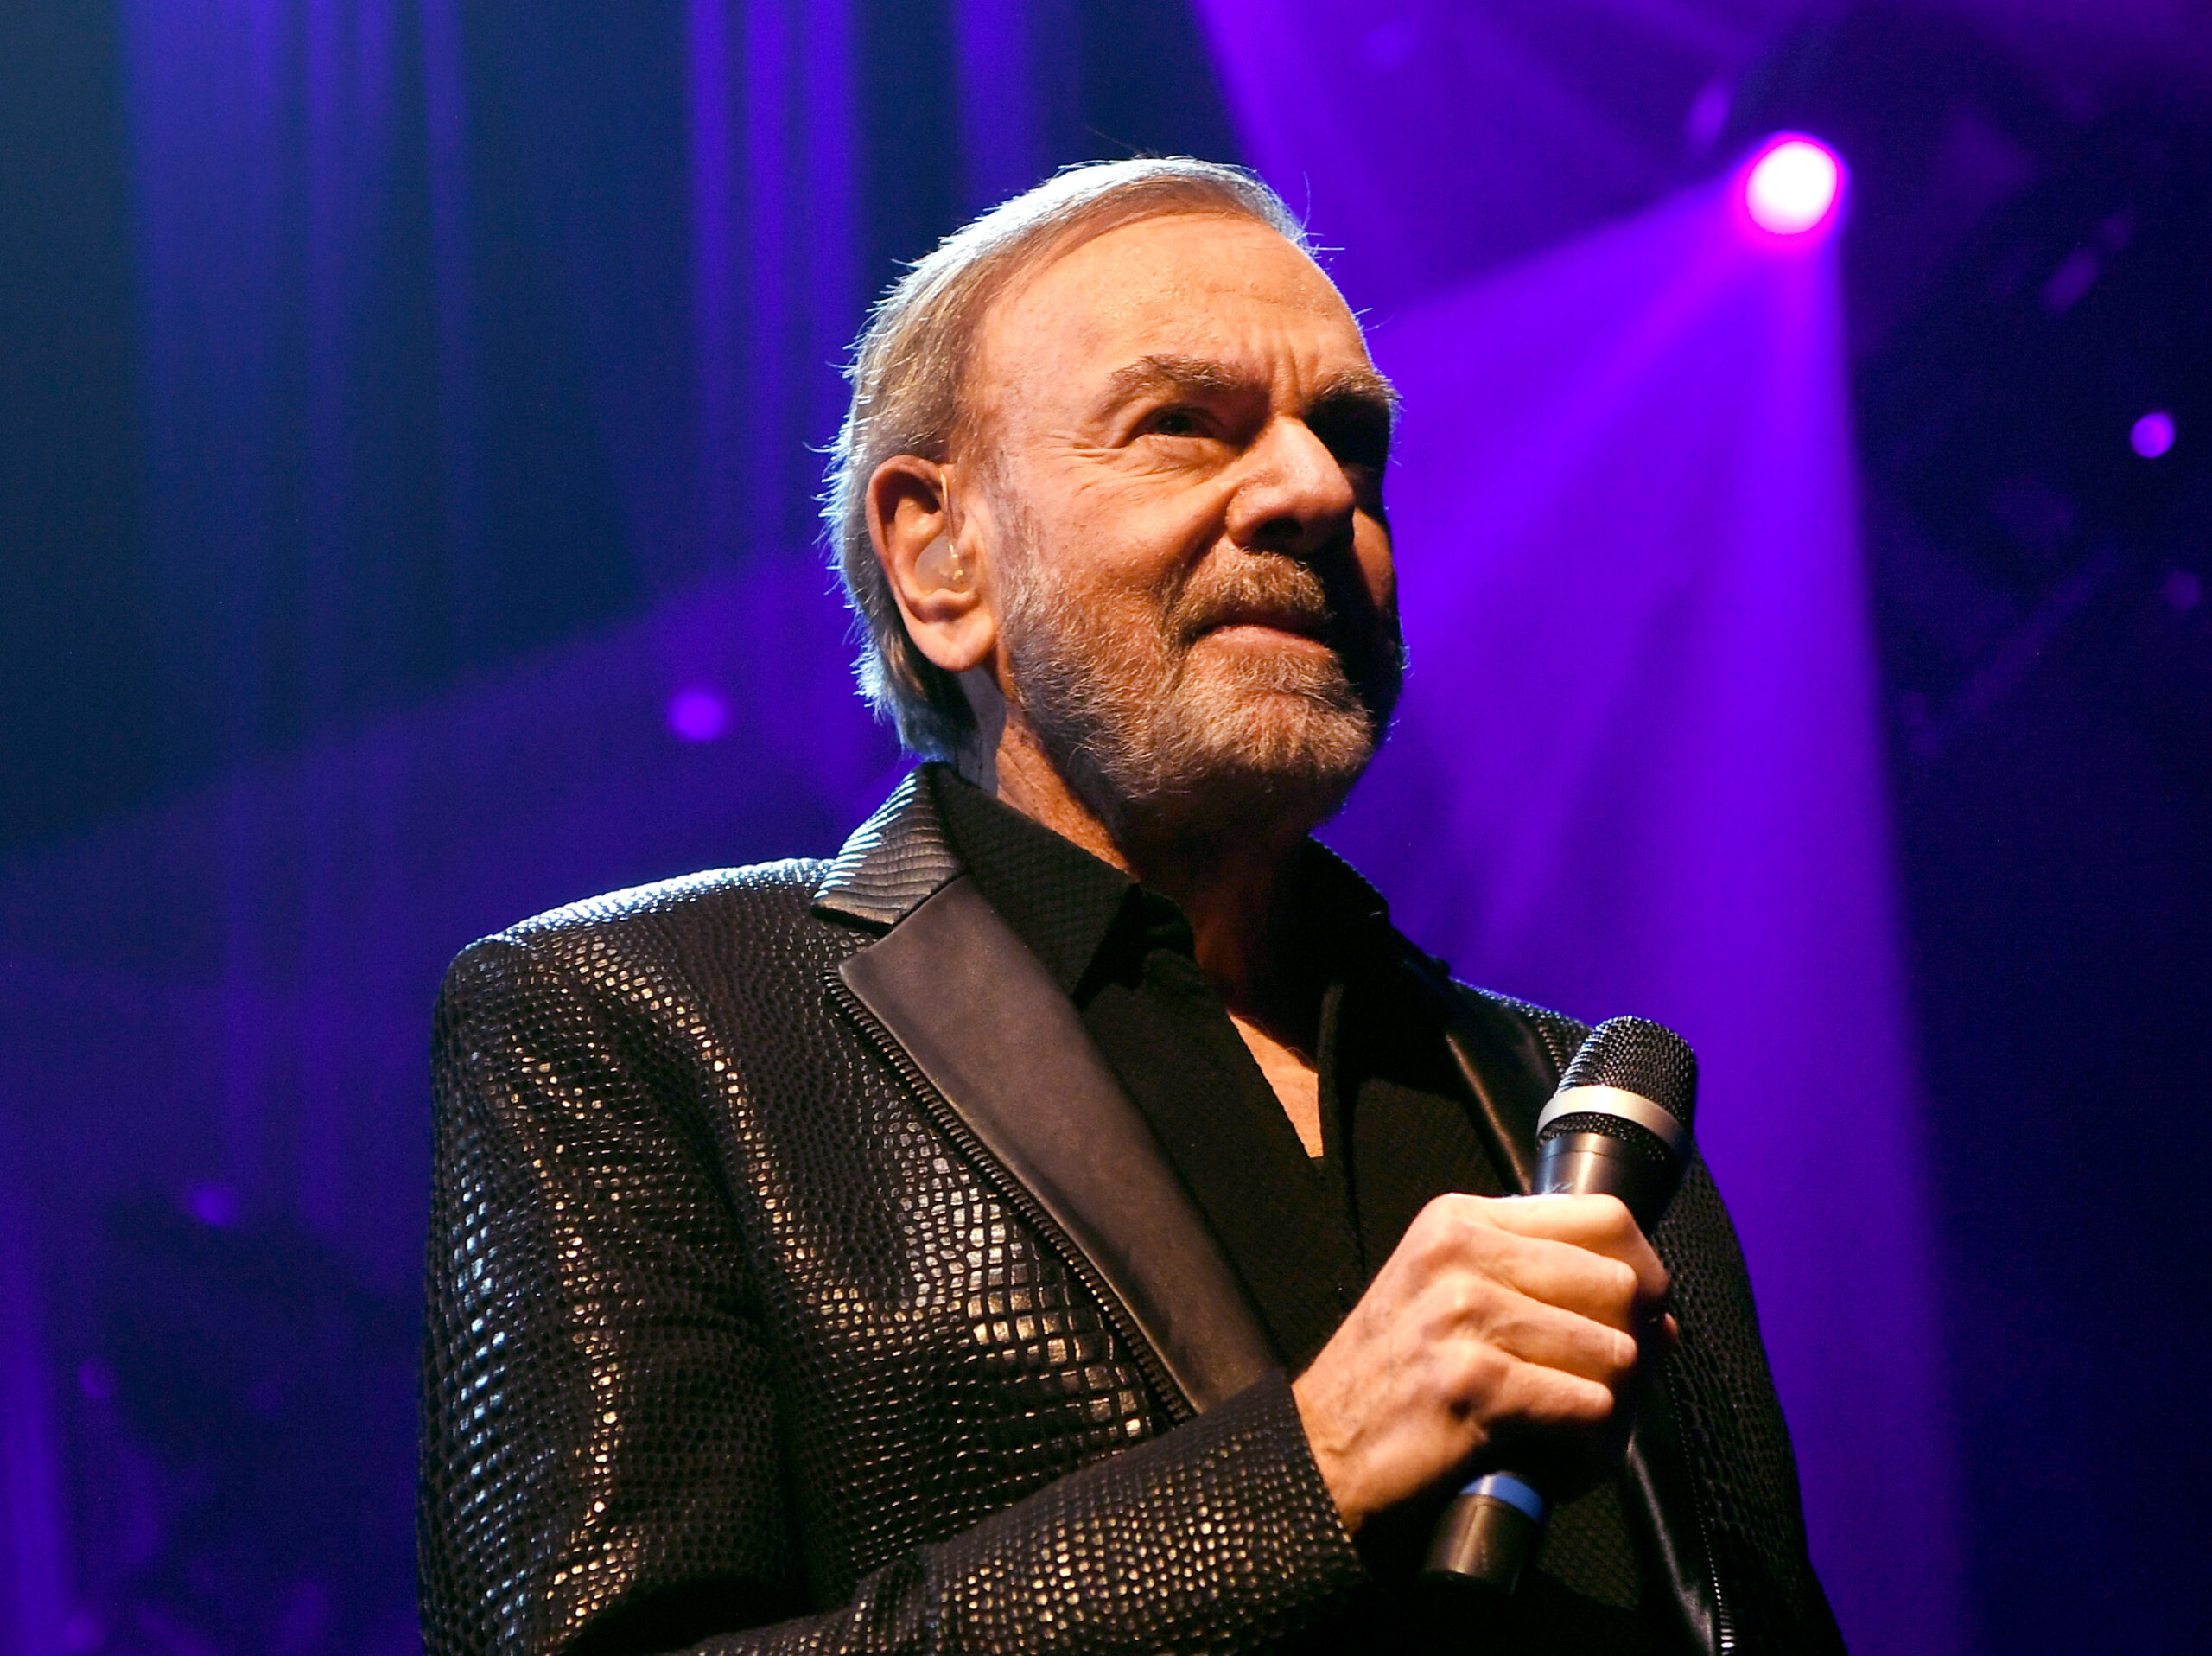 Neil Diamond On Accepting His Parkinson’s Diagnosis: ‘Can’t Really Fight This Thing’